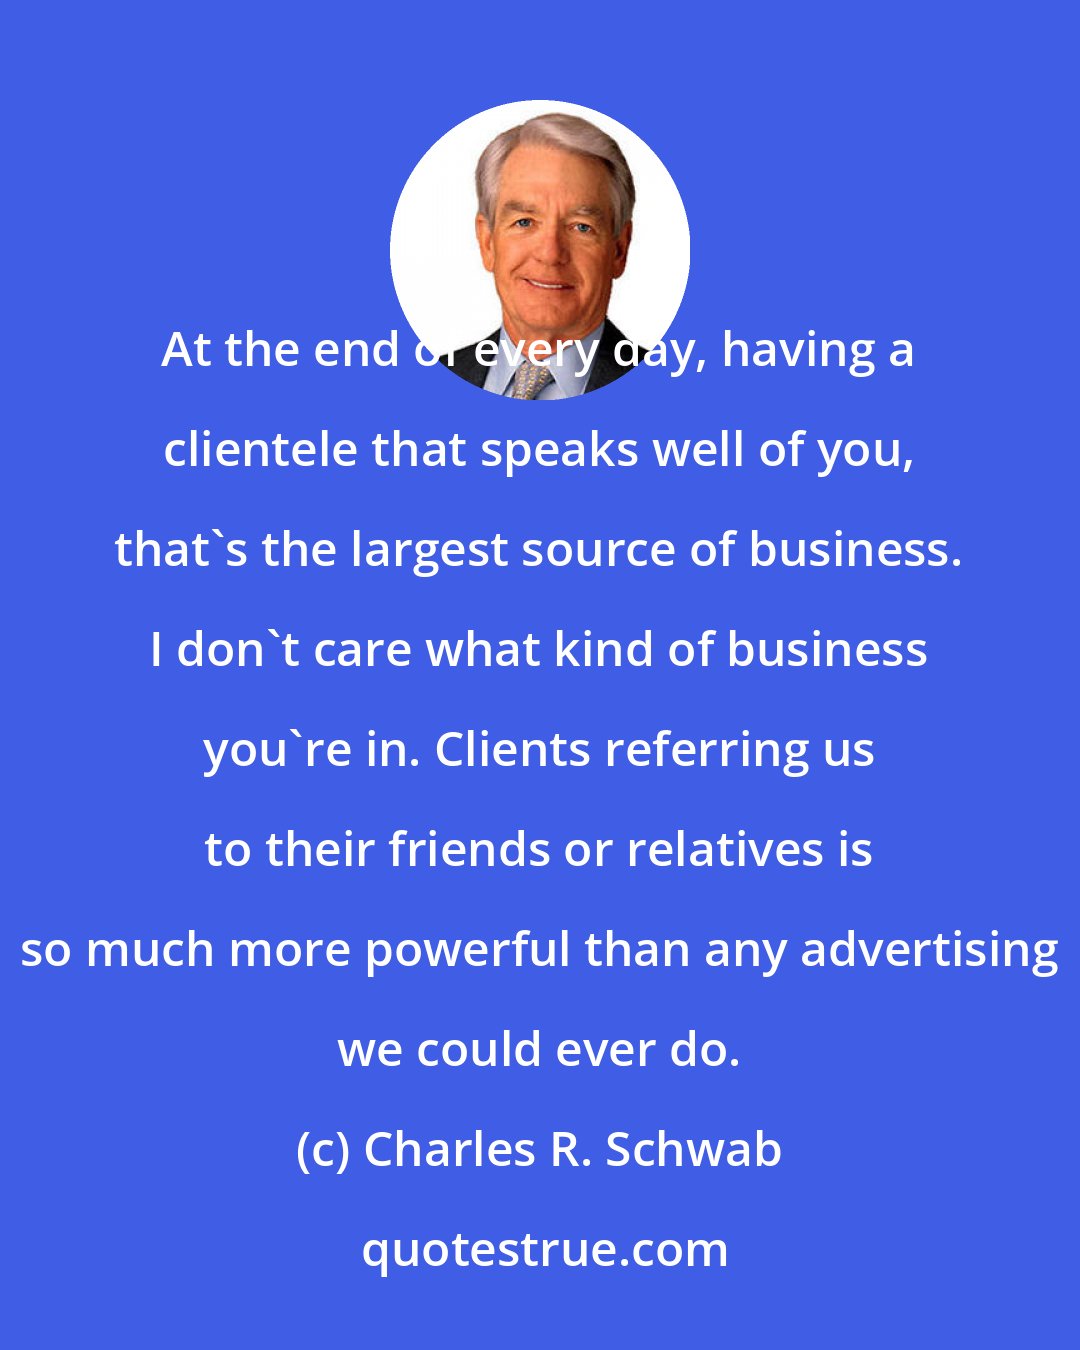 Charles R. Schwab: At the end of every day, having a clientele that speaks well of you, that's the largest source of business. I don't care what kind of business you're in. Clients referring us to their friends or relatives is so much more powerful than any advertising we could ever do.